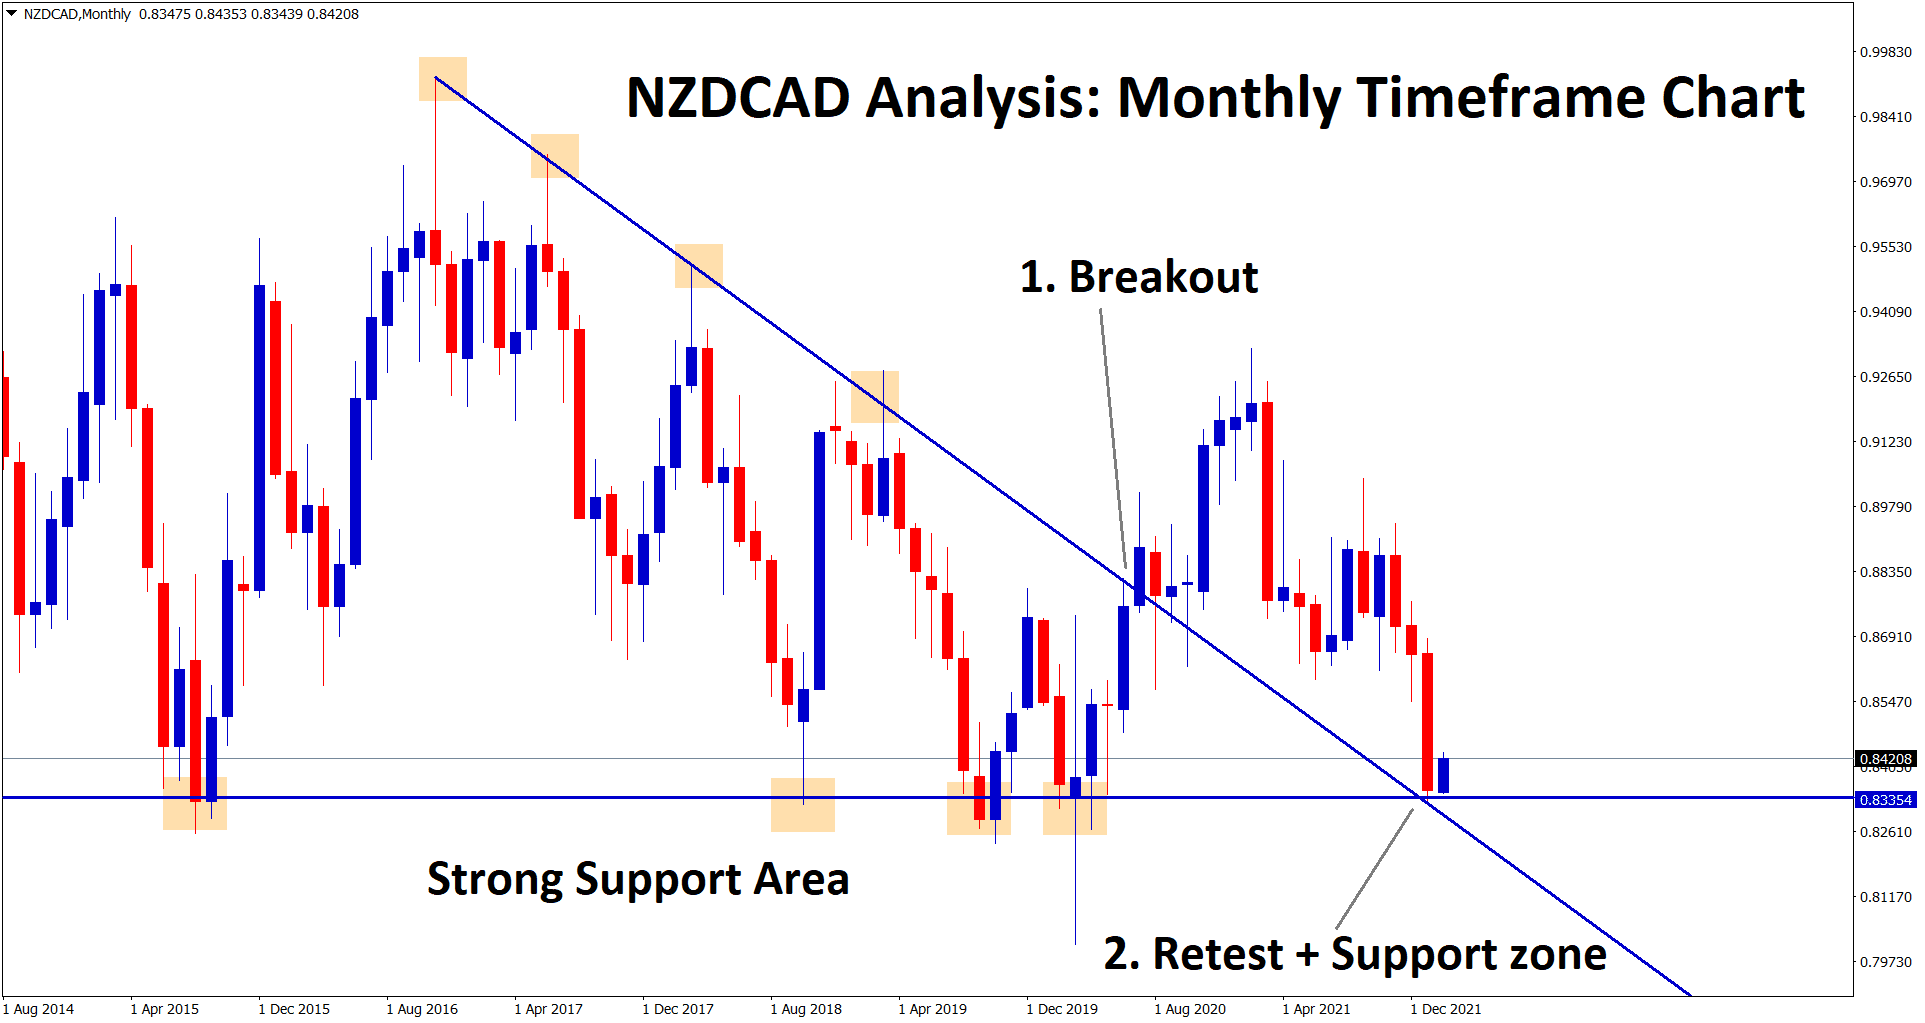 NZDCAD reached the strong support area and the retest zone of the descending triangle